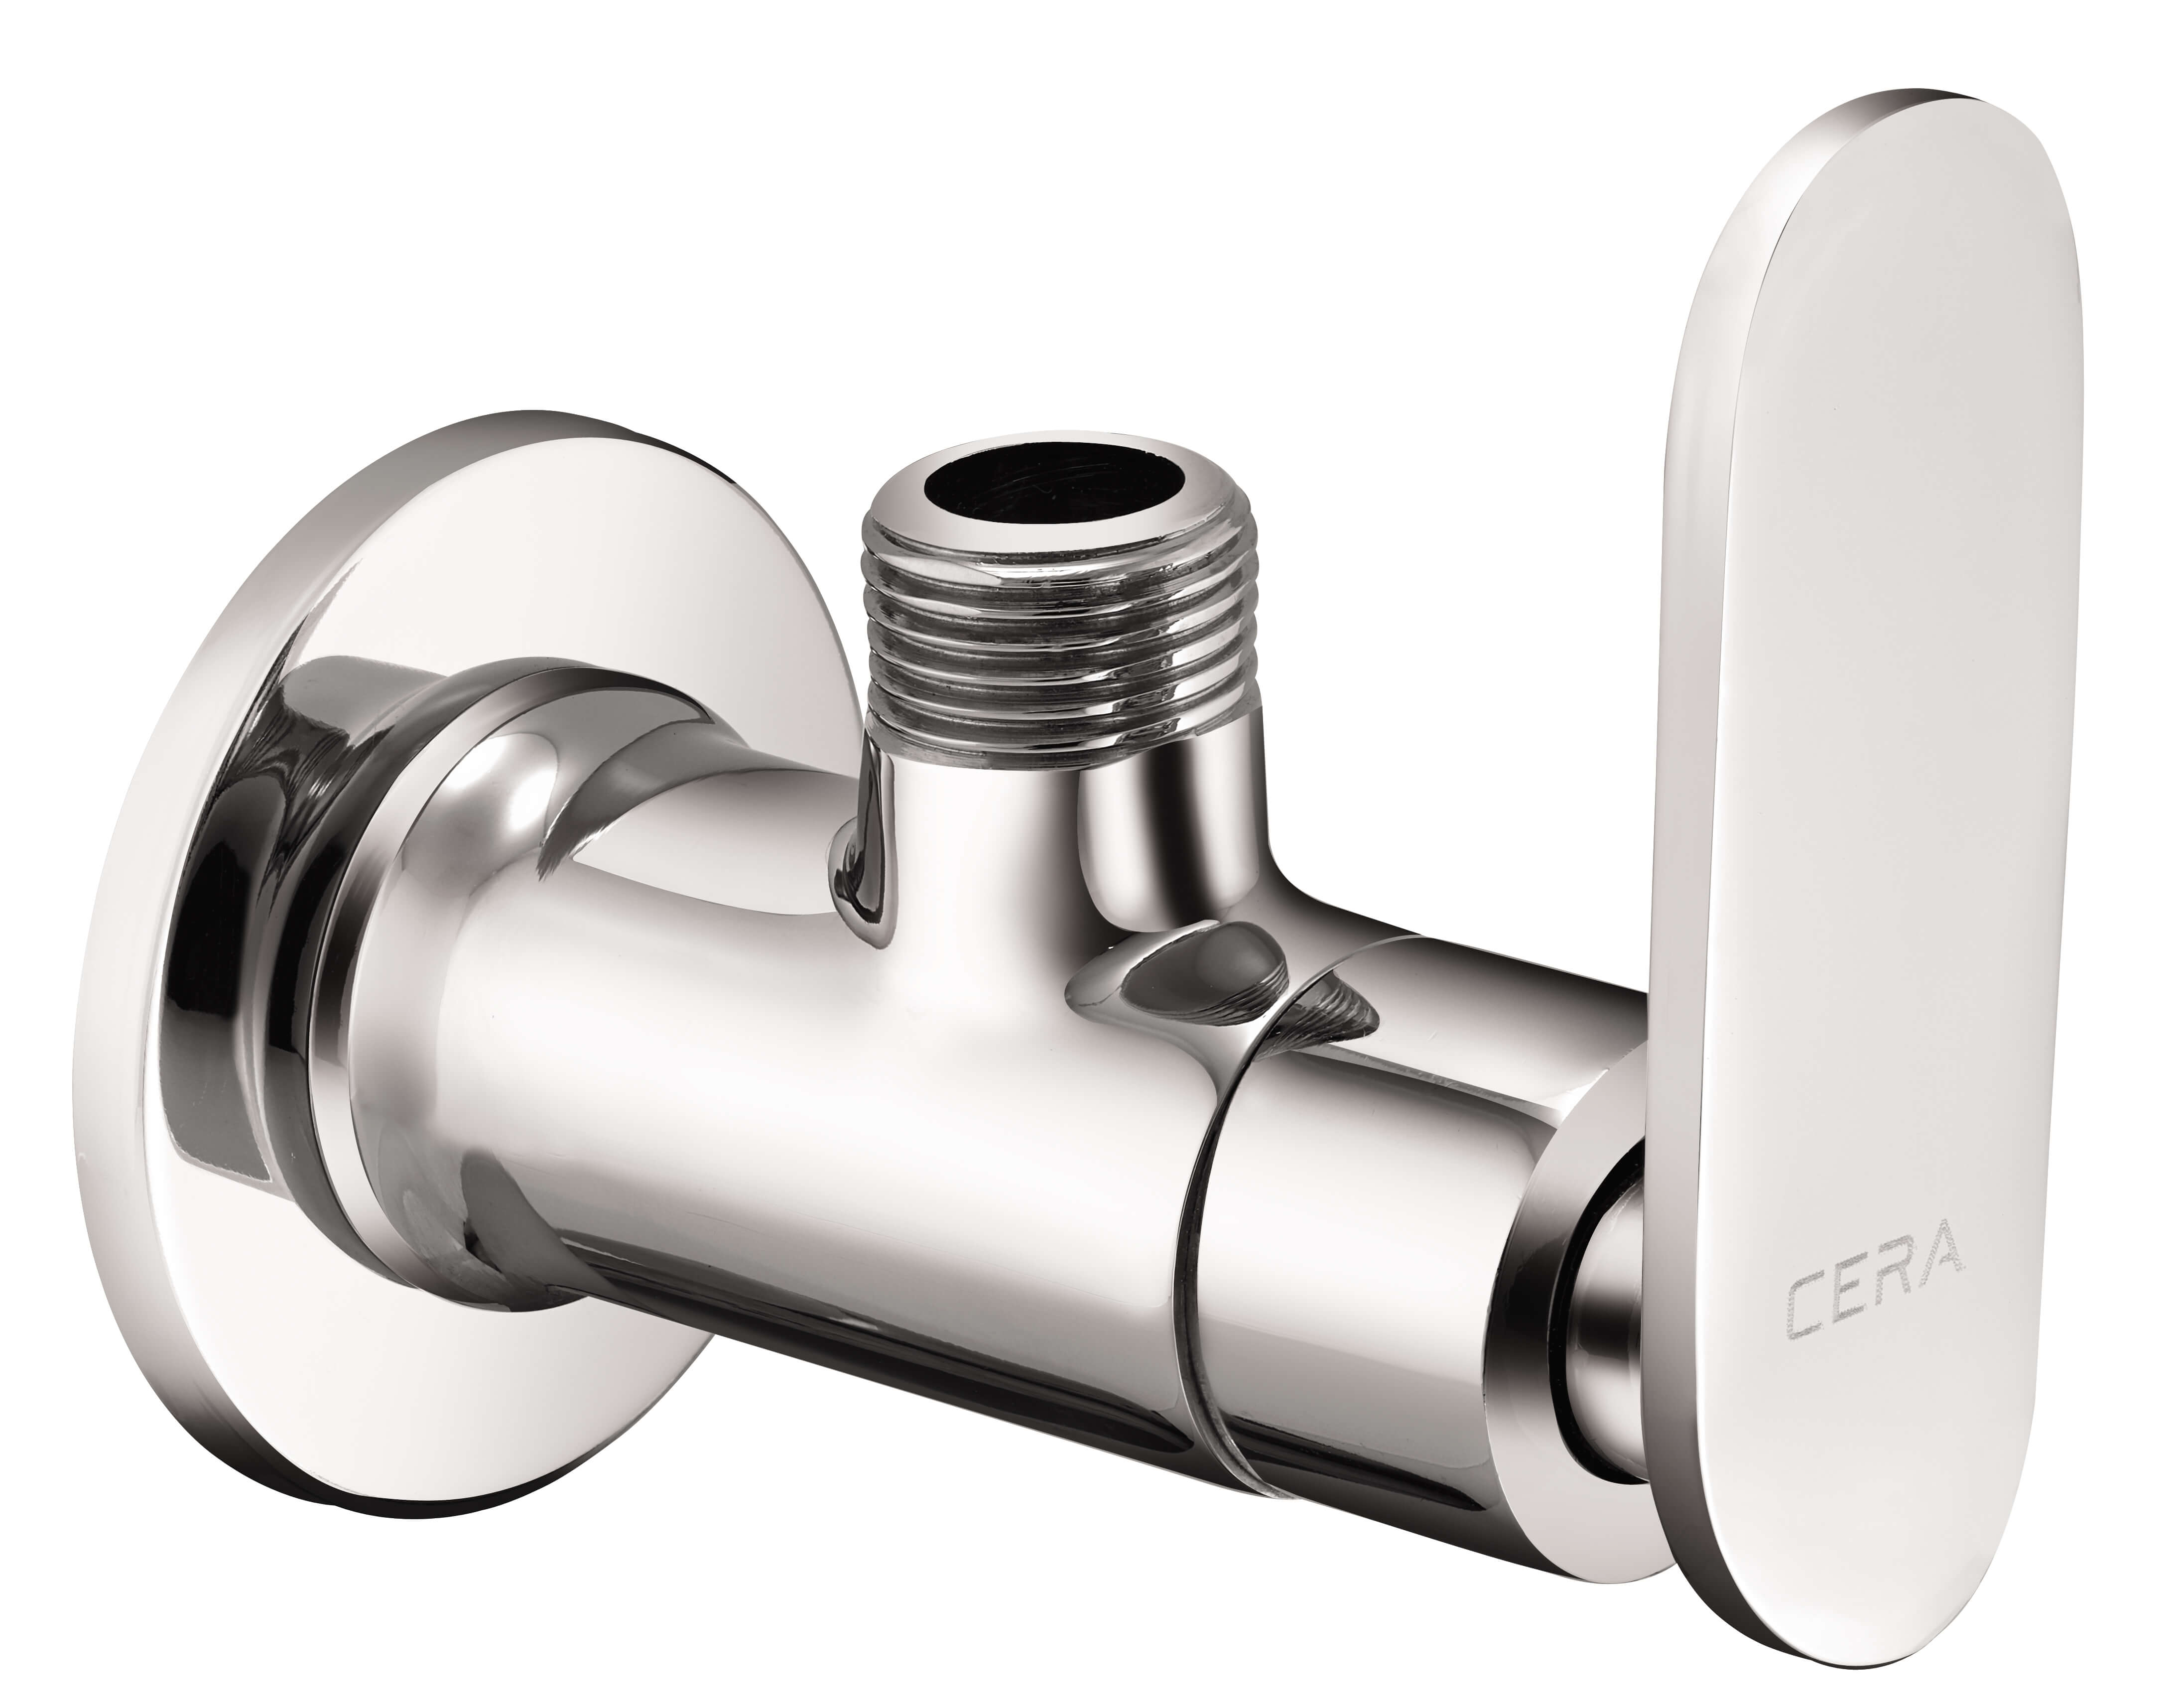 Cera Angle Cock Brooklyn Faucets  F1018201 Pack of 2